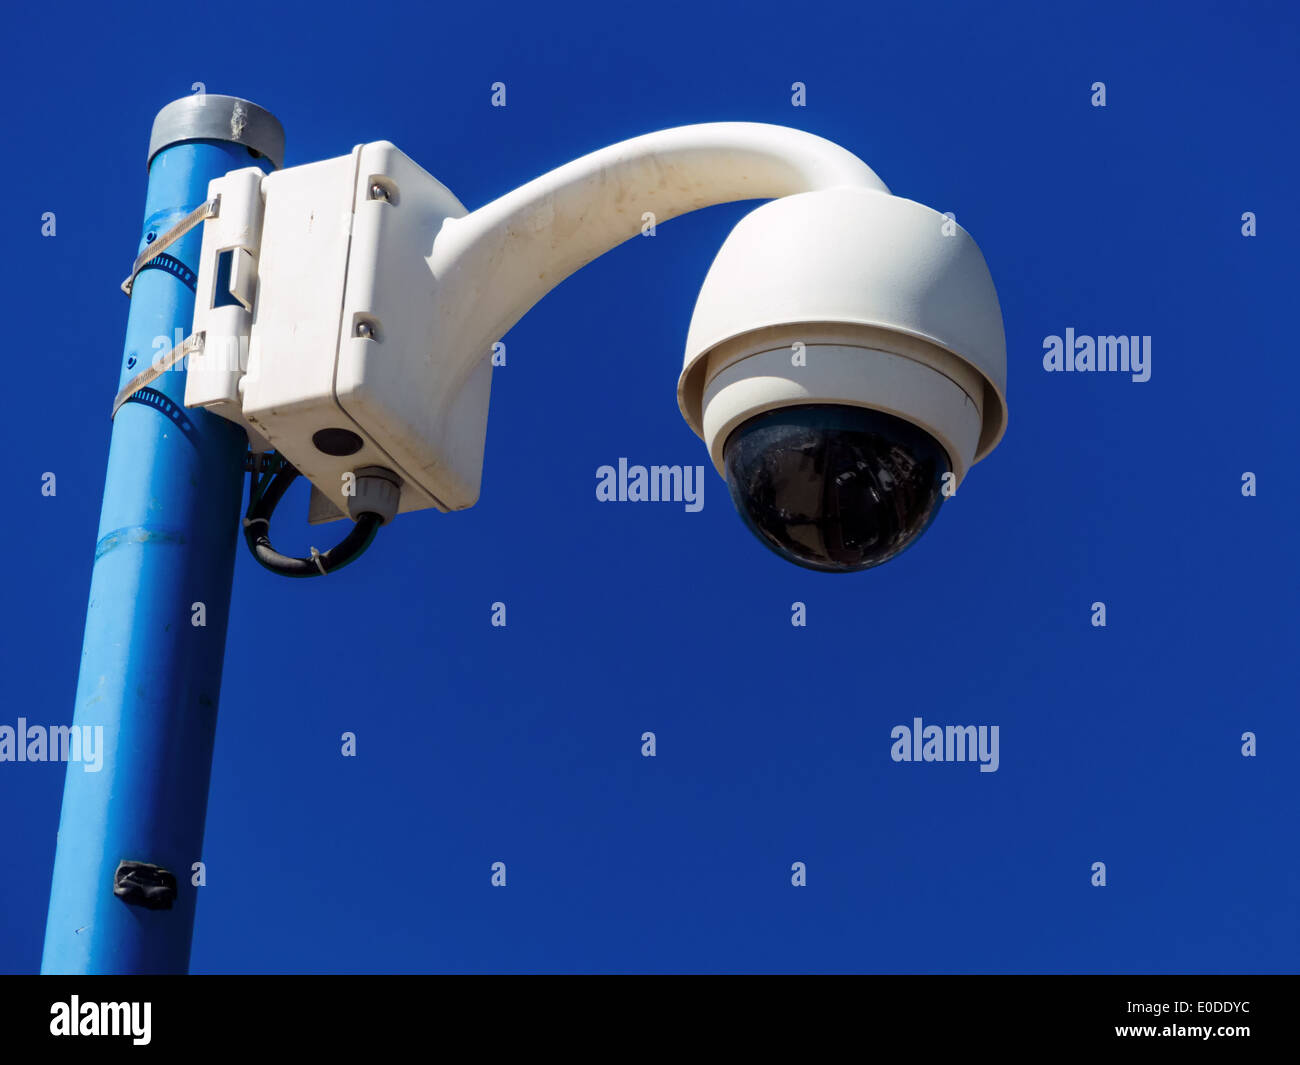 supervision camera by a wall. Videosupervision belongs to the everyday life, ‹berwachungskamera an einer Mauer. Videoueberwachun Stock Photo